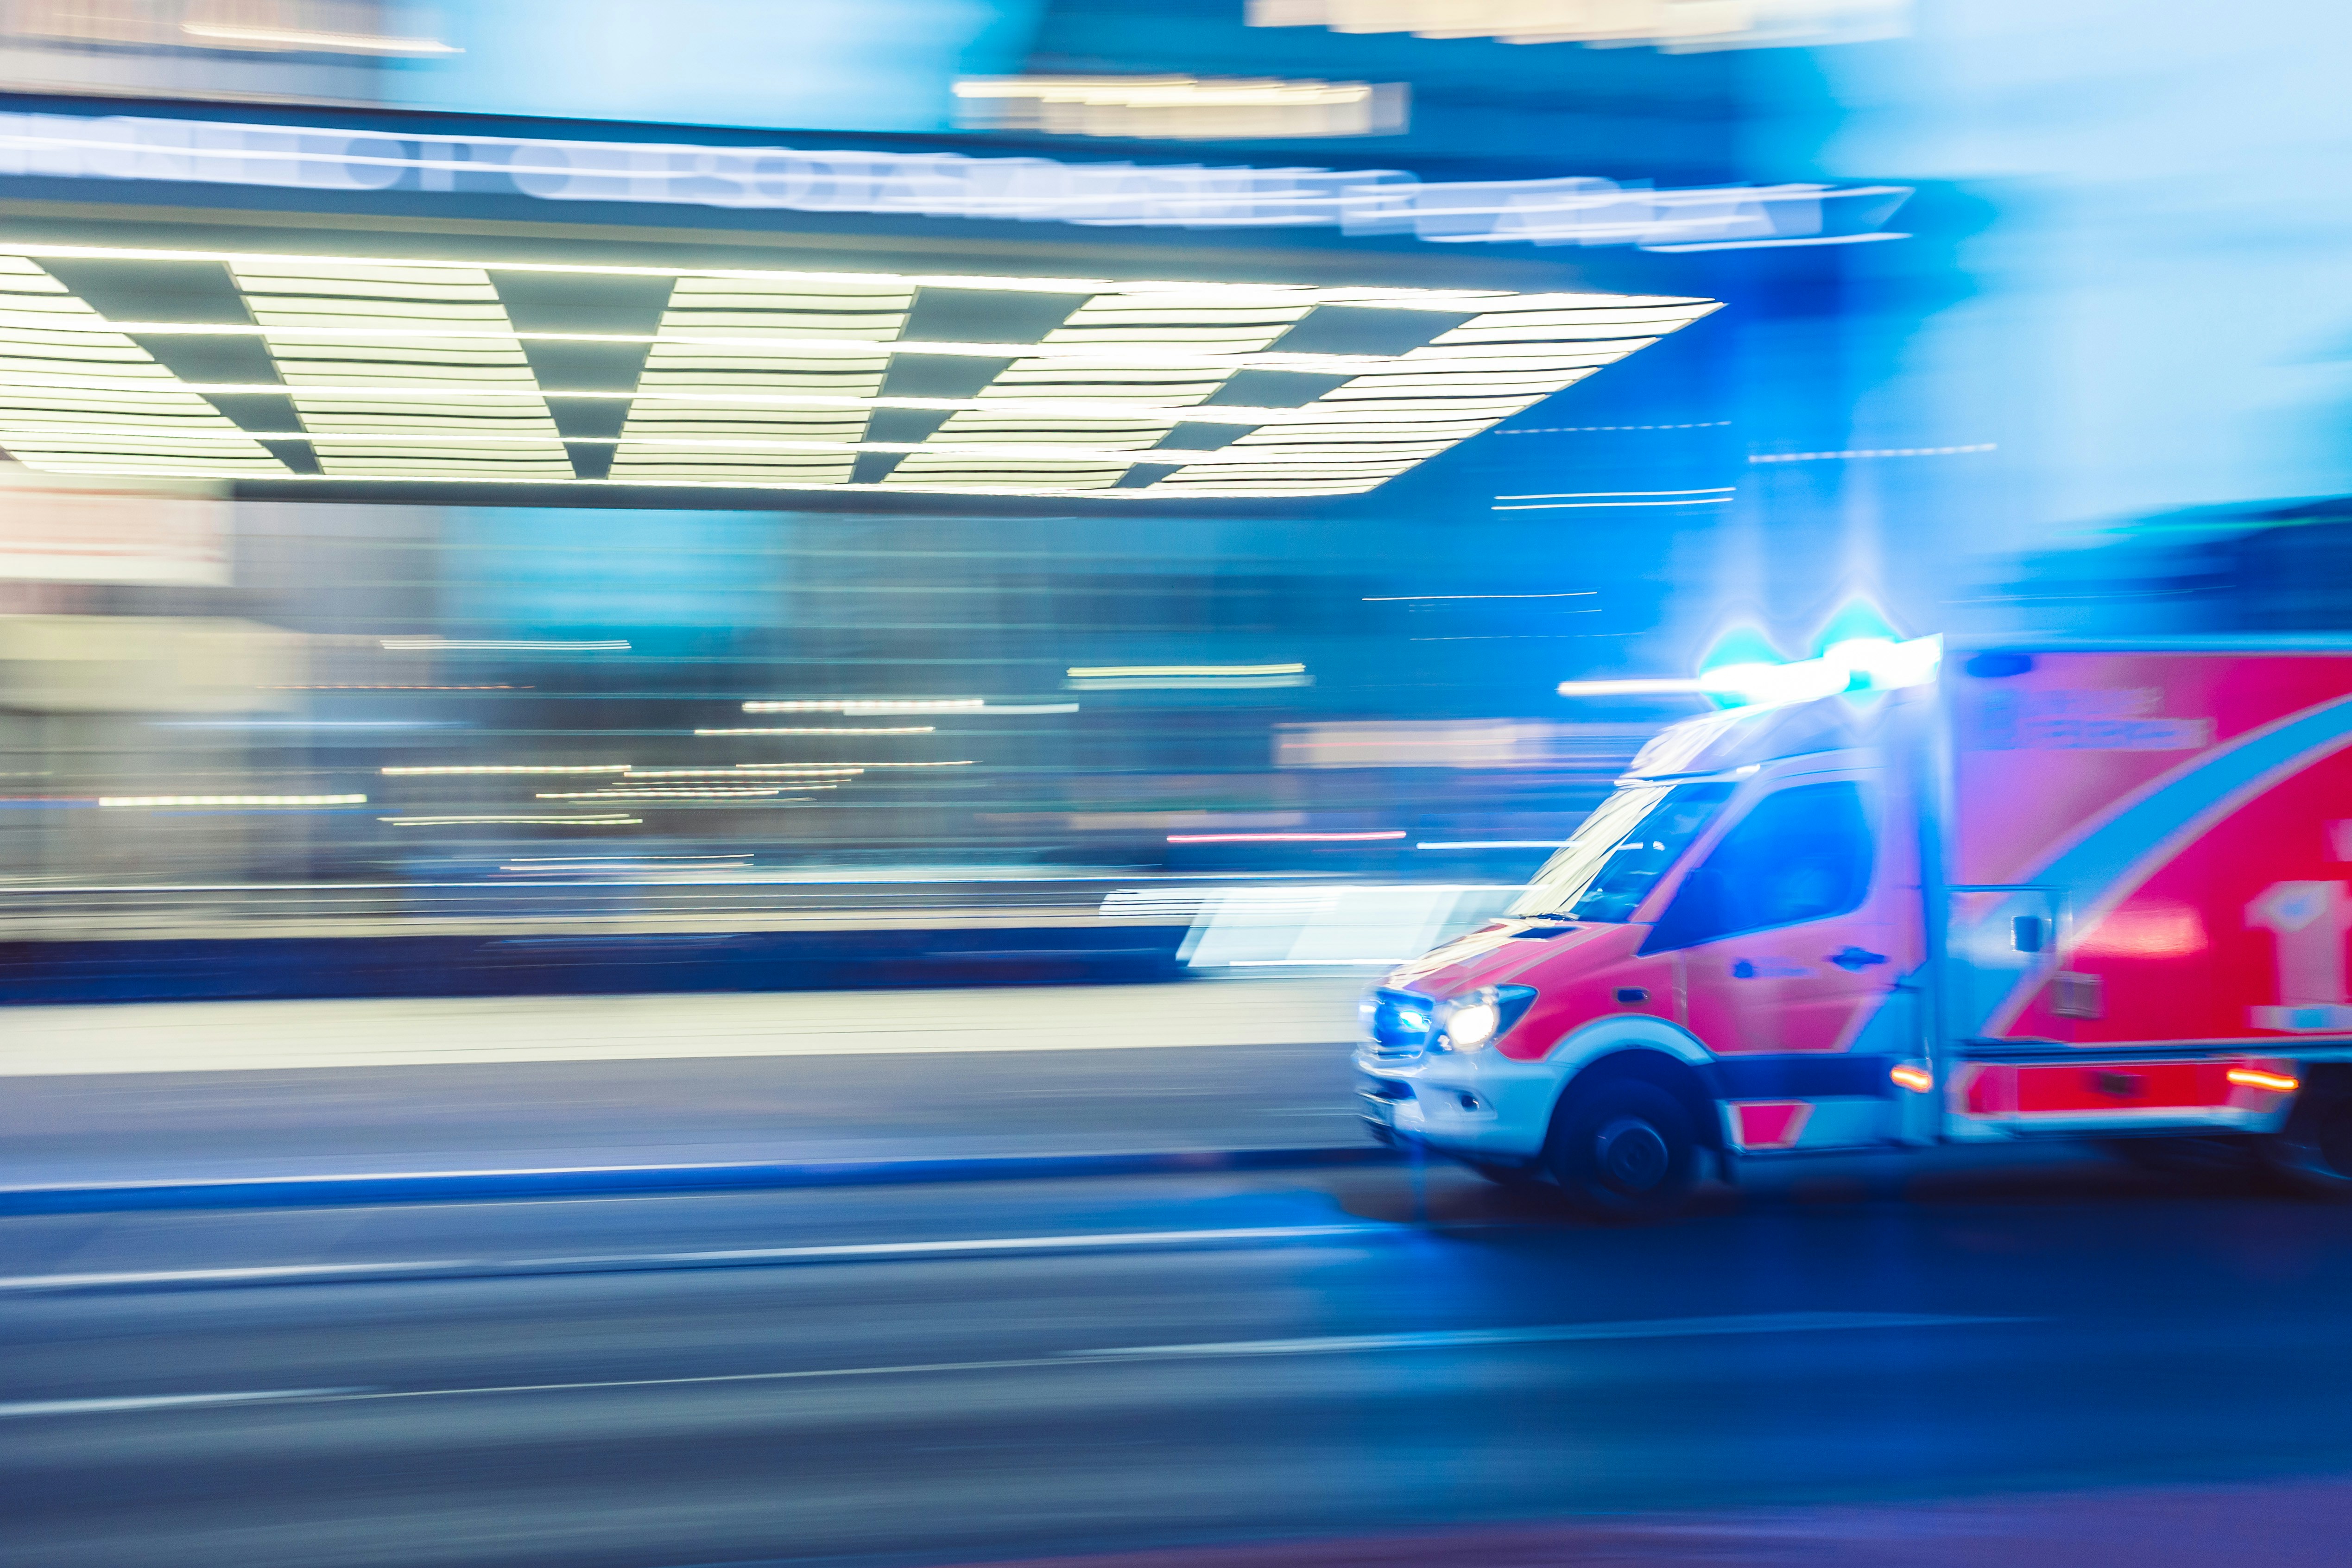 blurred motion image of emergency vehicle in lighted tunnel